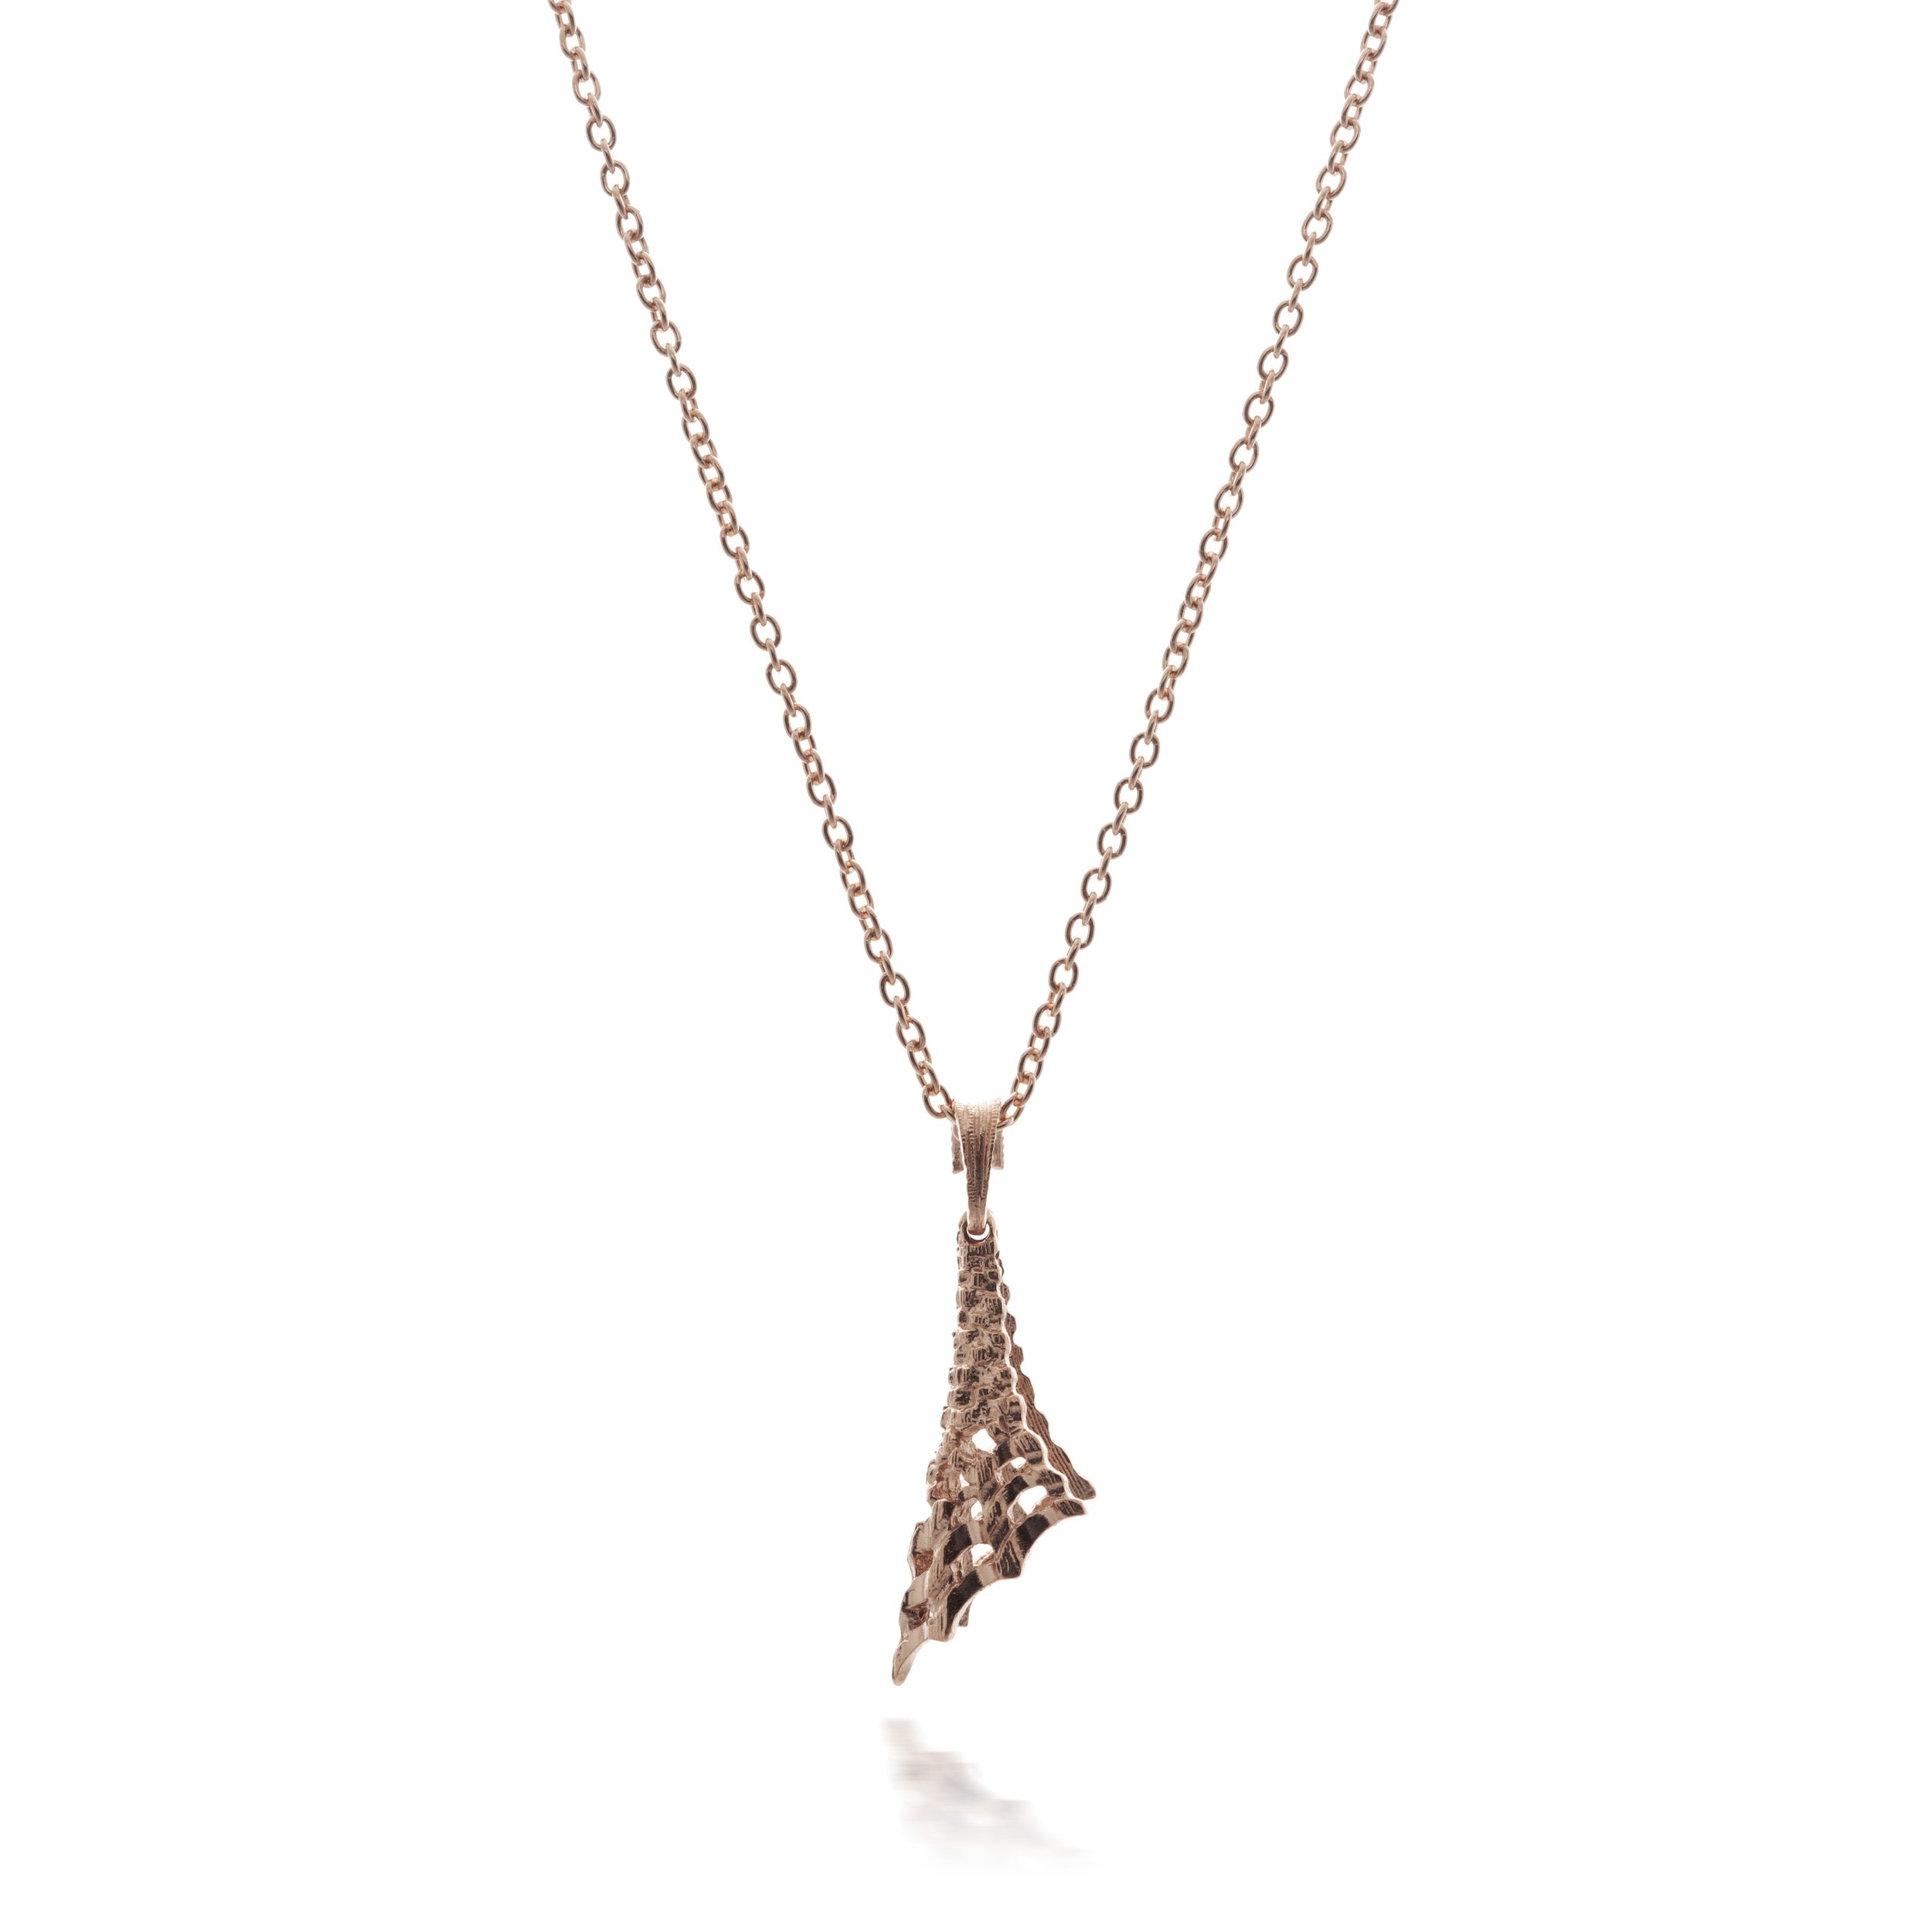 Drop necklace in rose gold